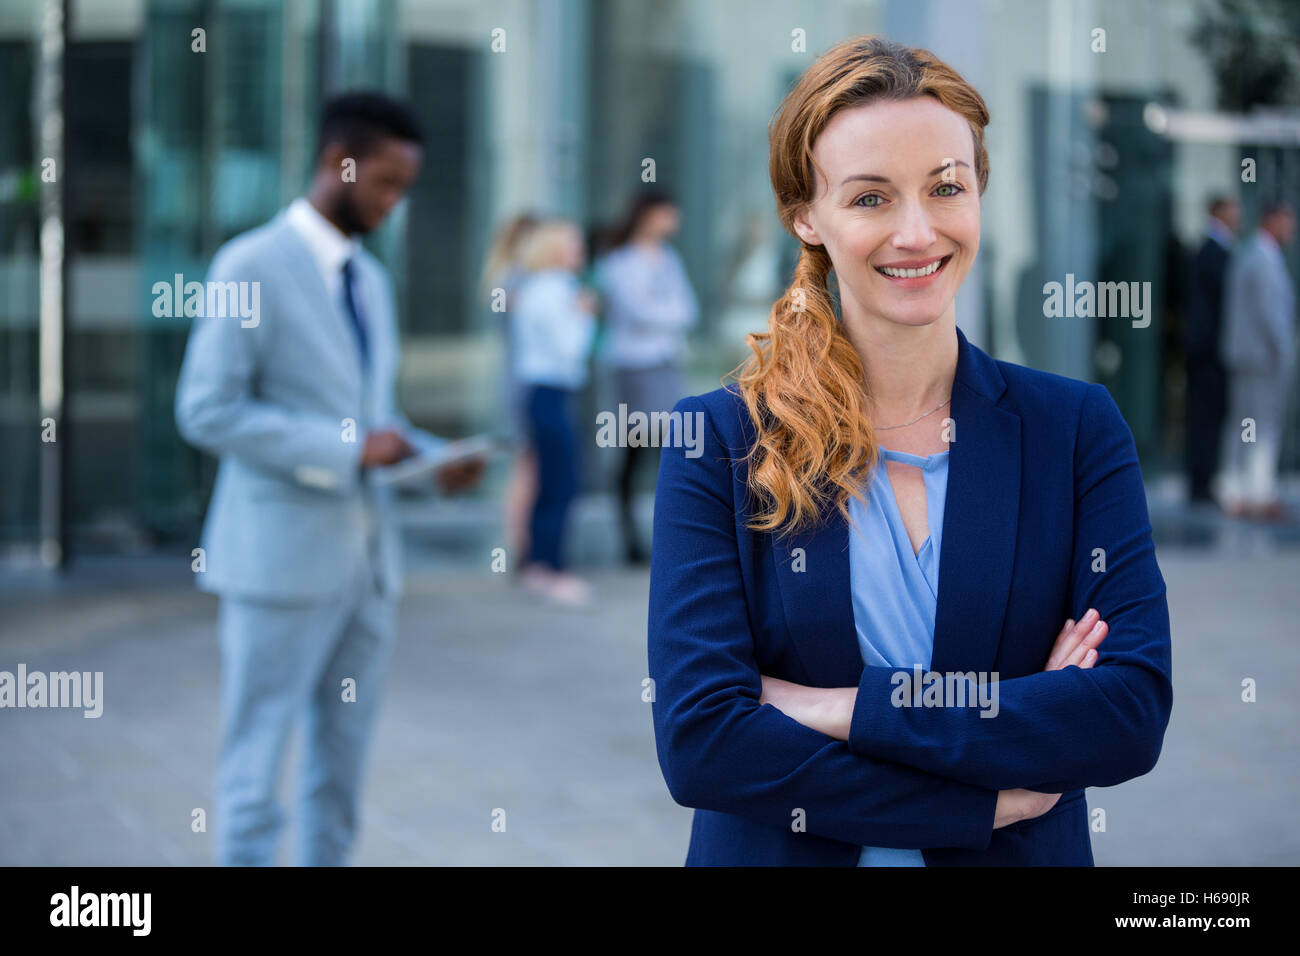 Smiling businesswoman standing with arms crossed in office building Stock Photo